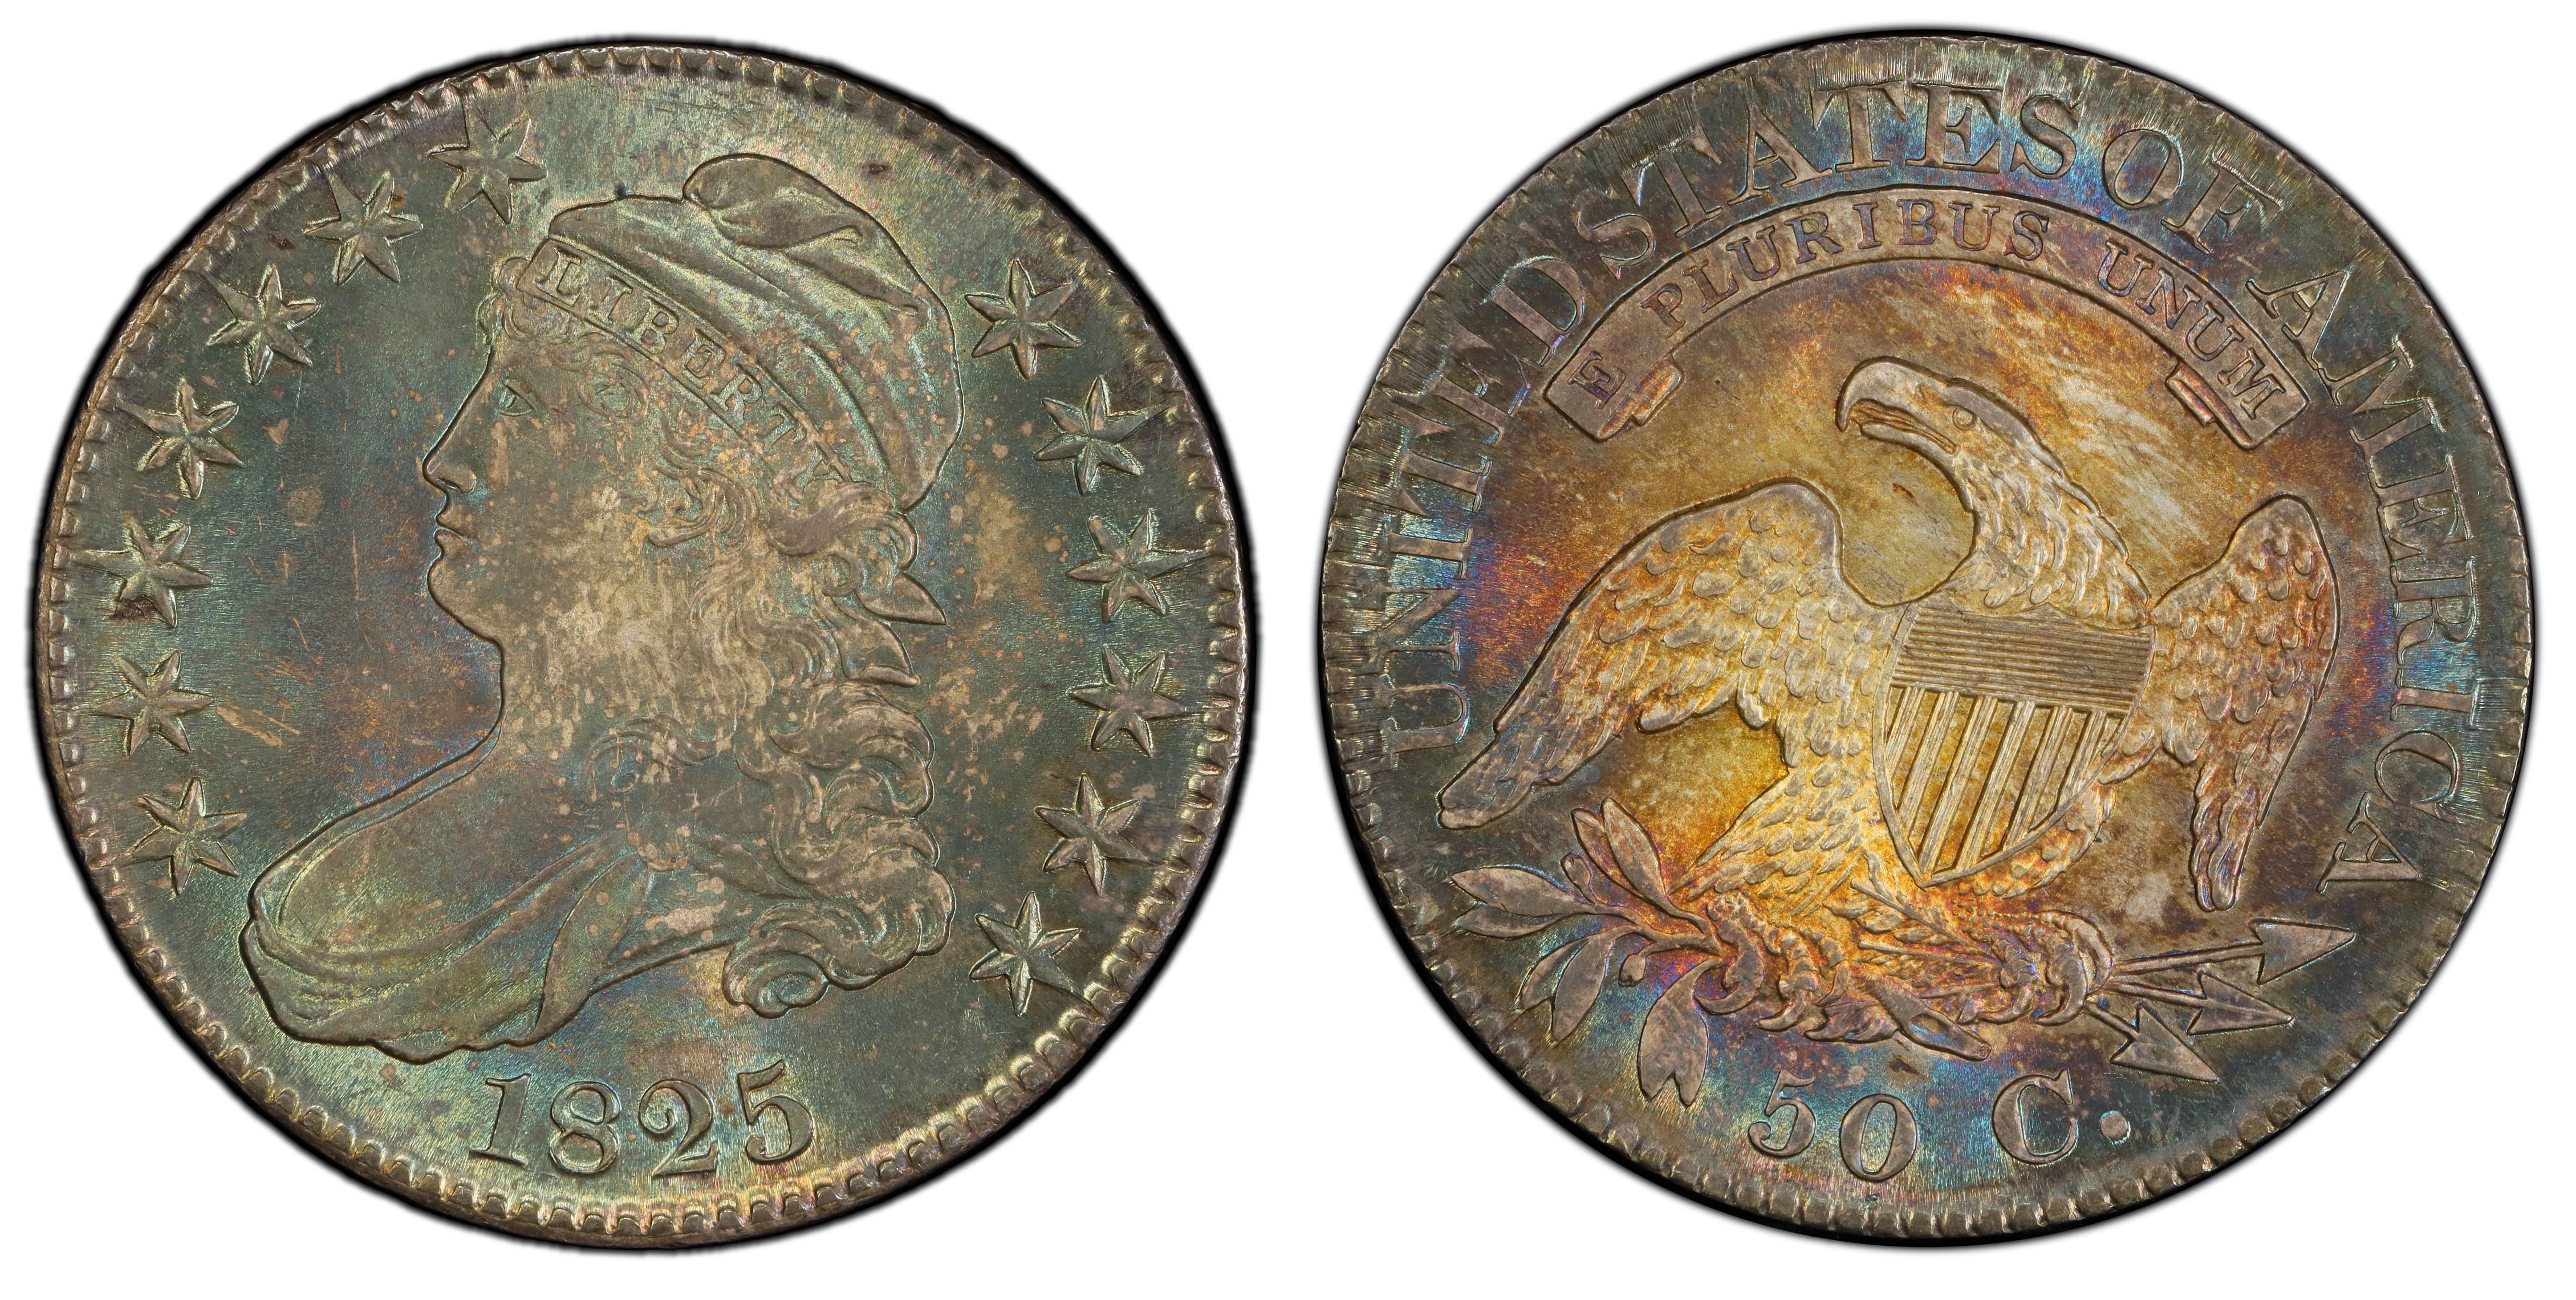 1825 50C (Regular Strike) Capped Bust Half Dollar - PCGS CoinFacts